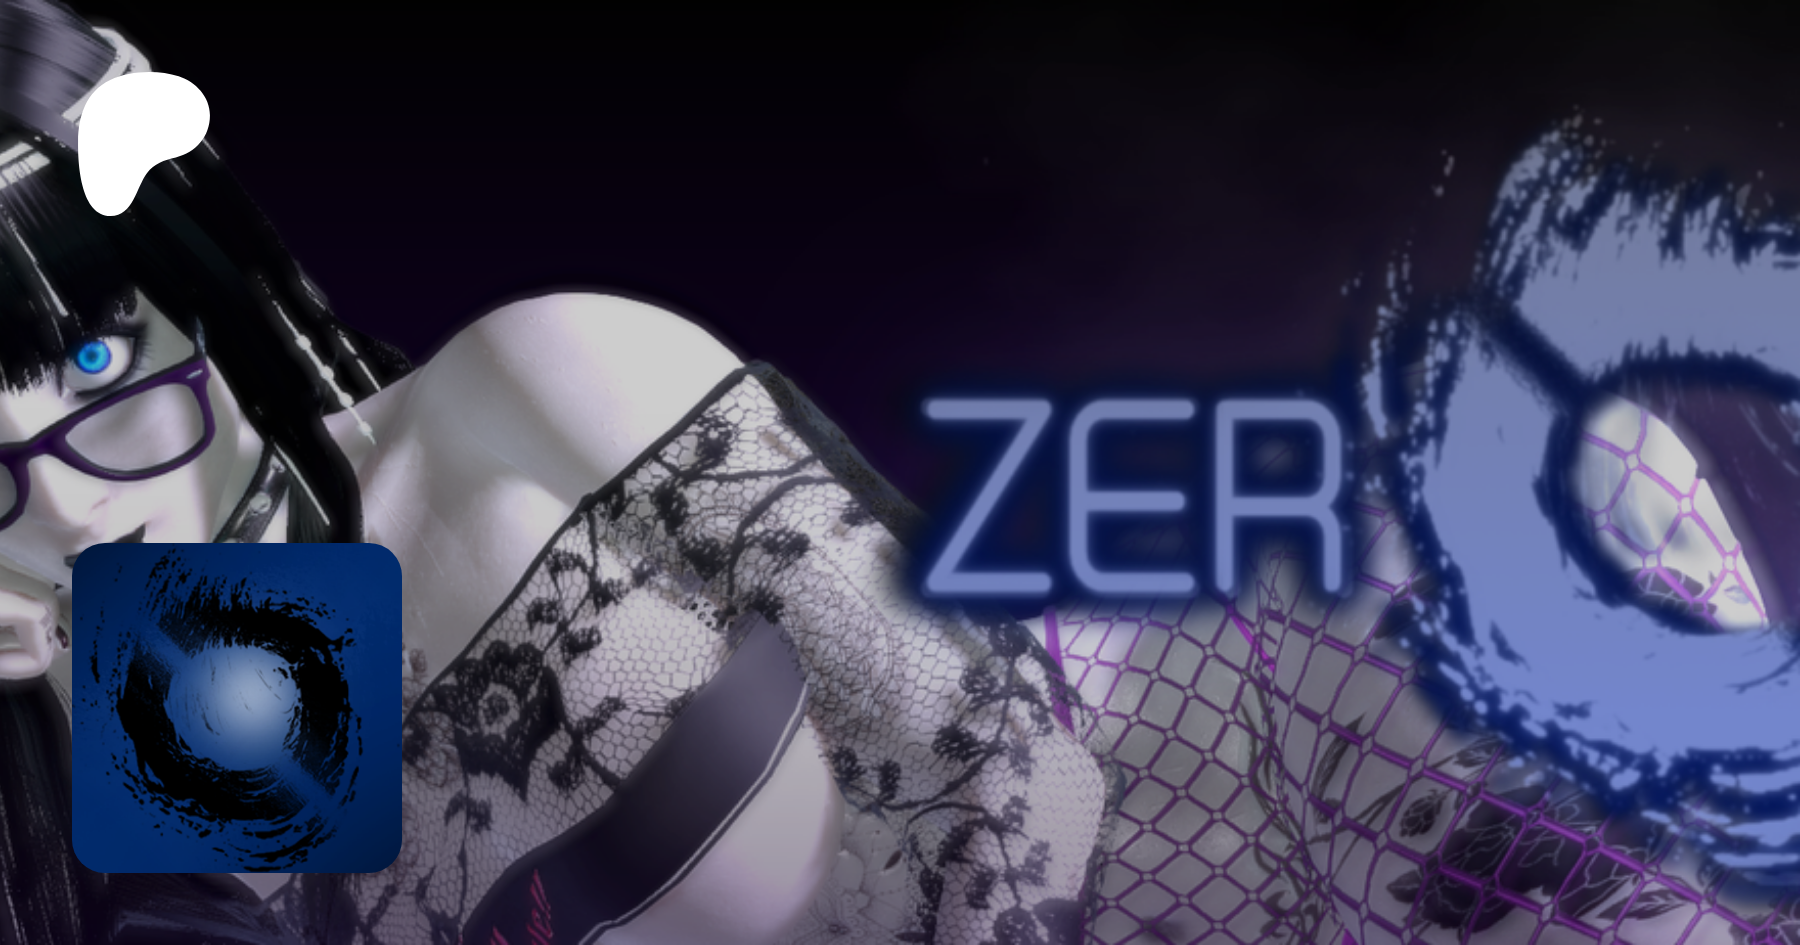 ZER0 3D | creating Adult Animation | Patreon